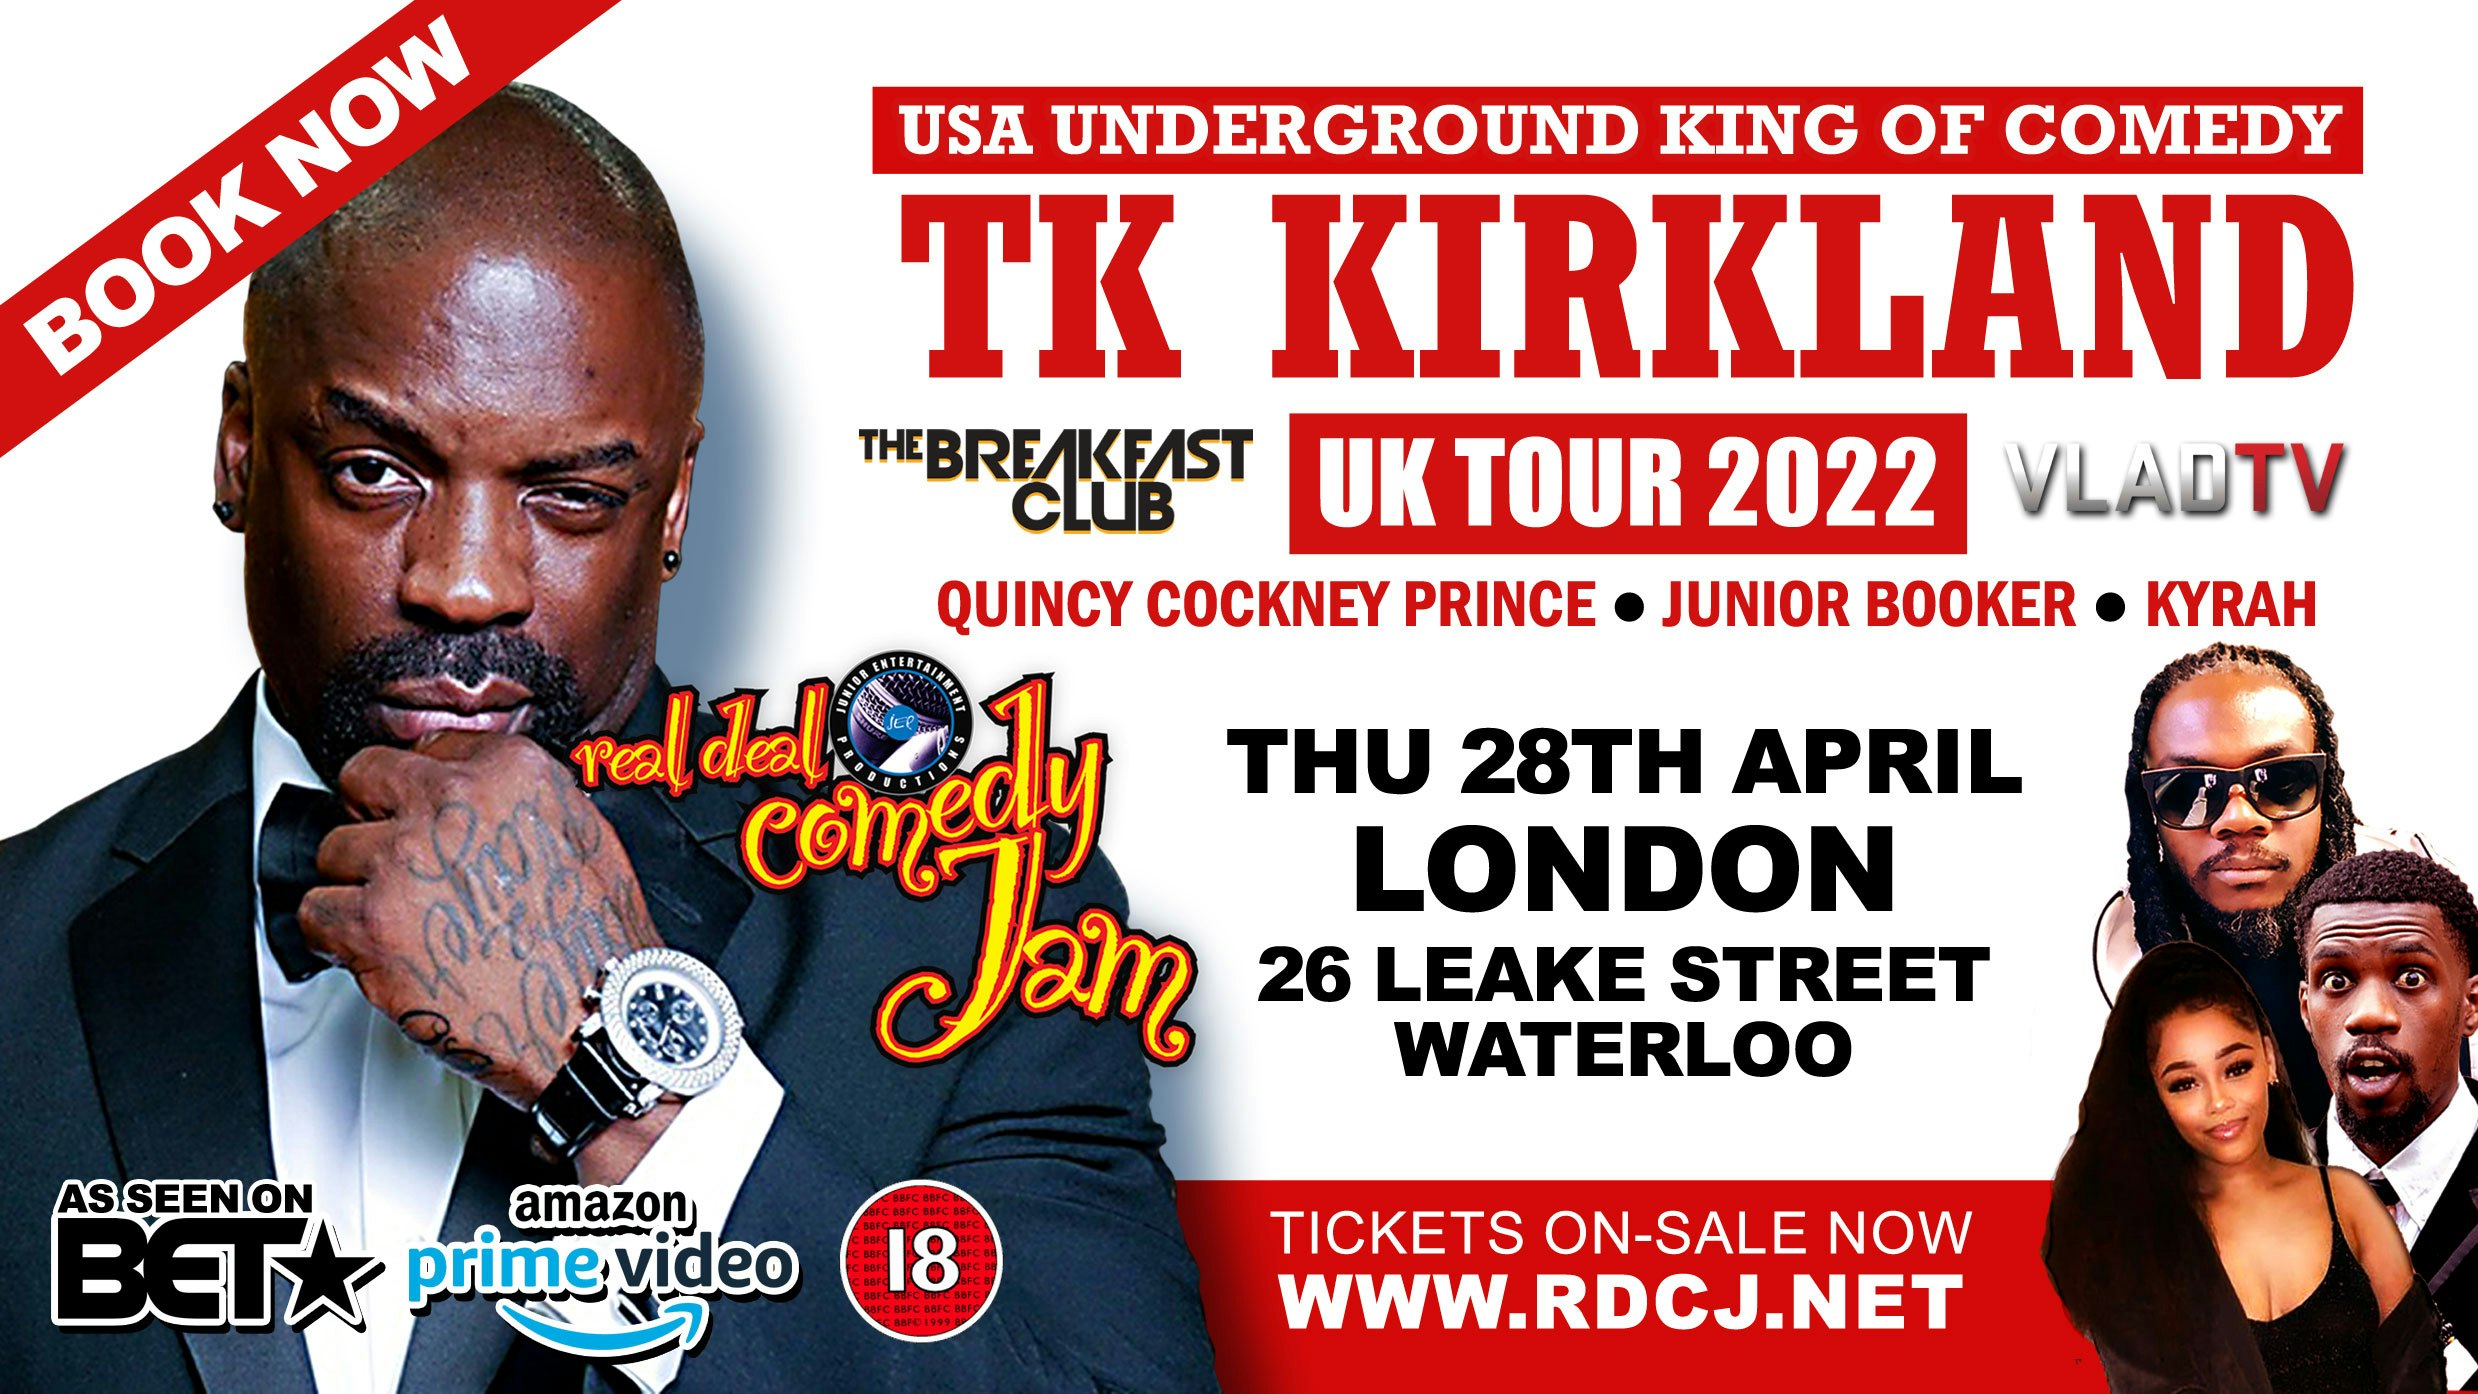 London Real Deal Comedy Jam